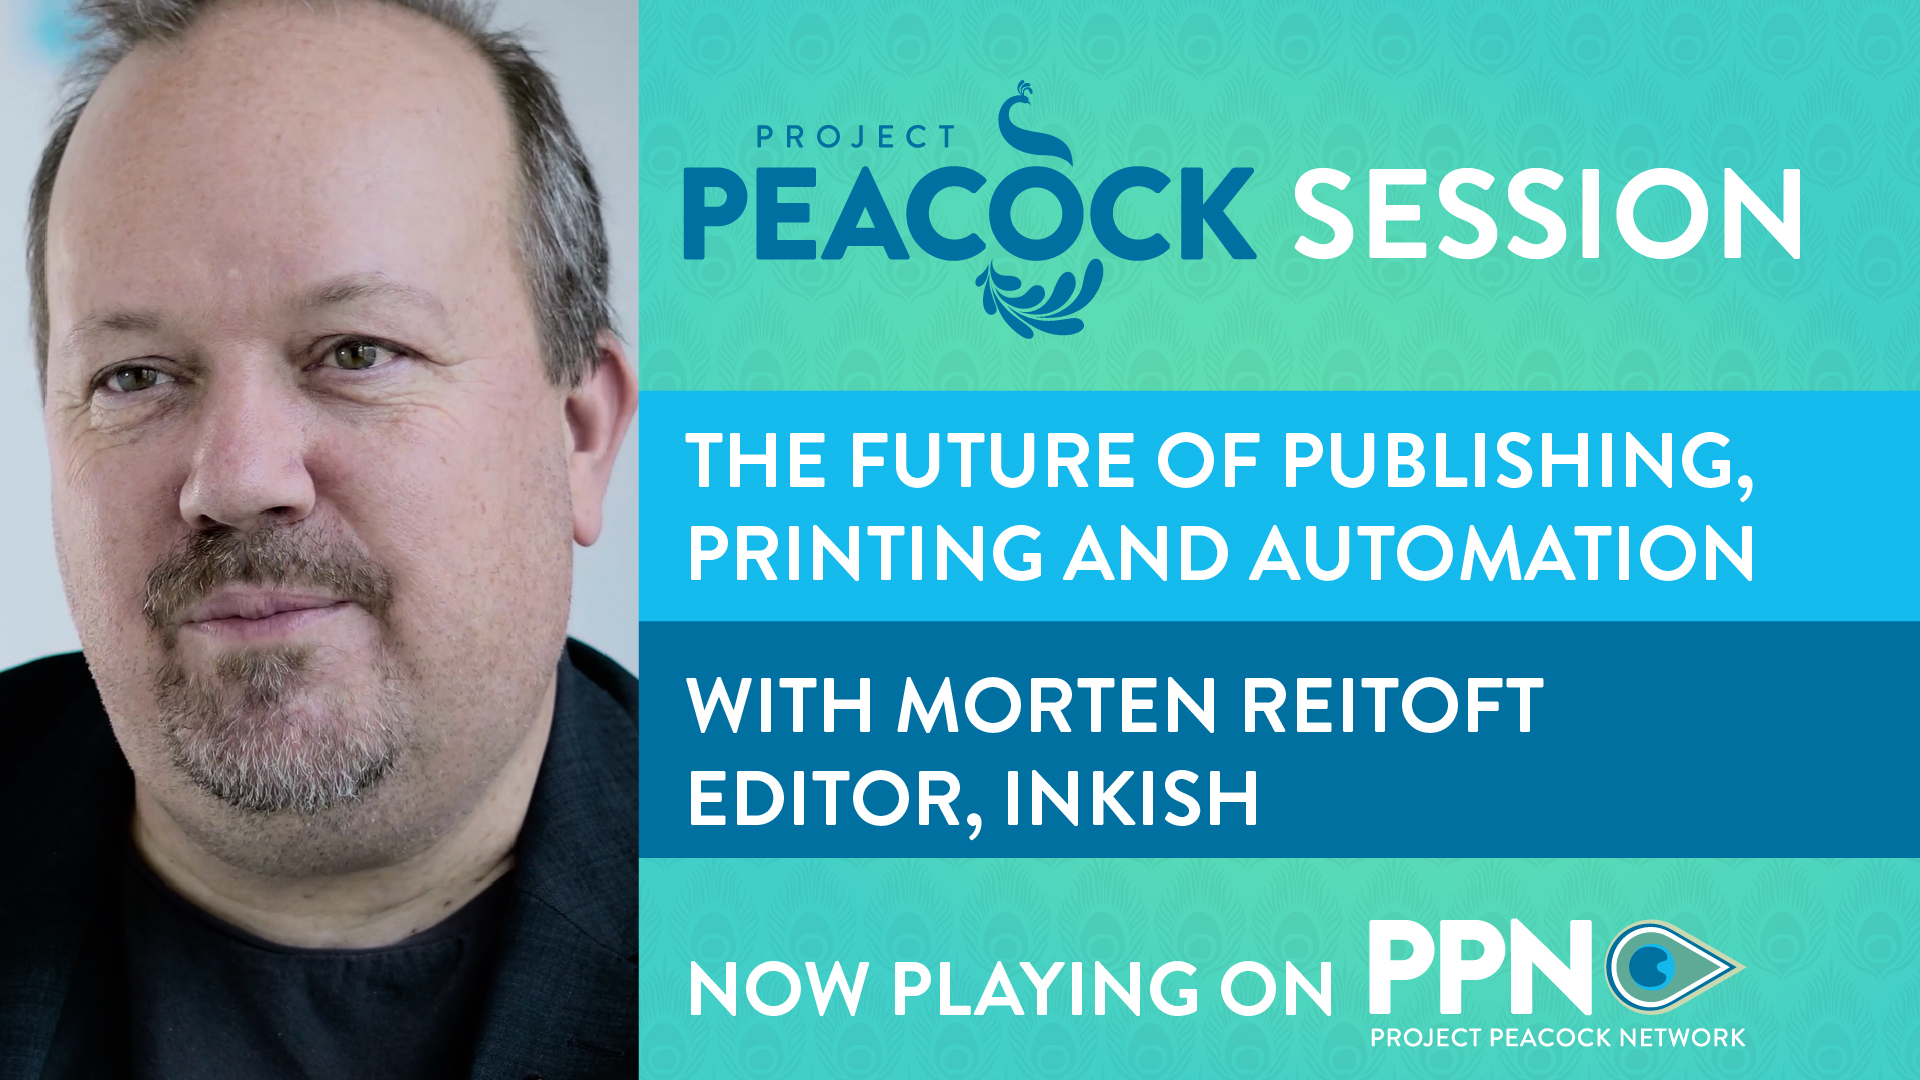 PROJECT PEACOCK: THE FUTURE OF PUBLISHING, PRINTING, AND AUTOMATION